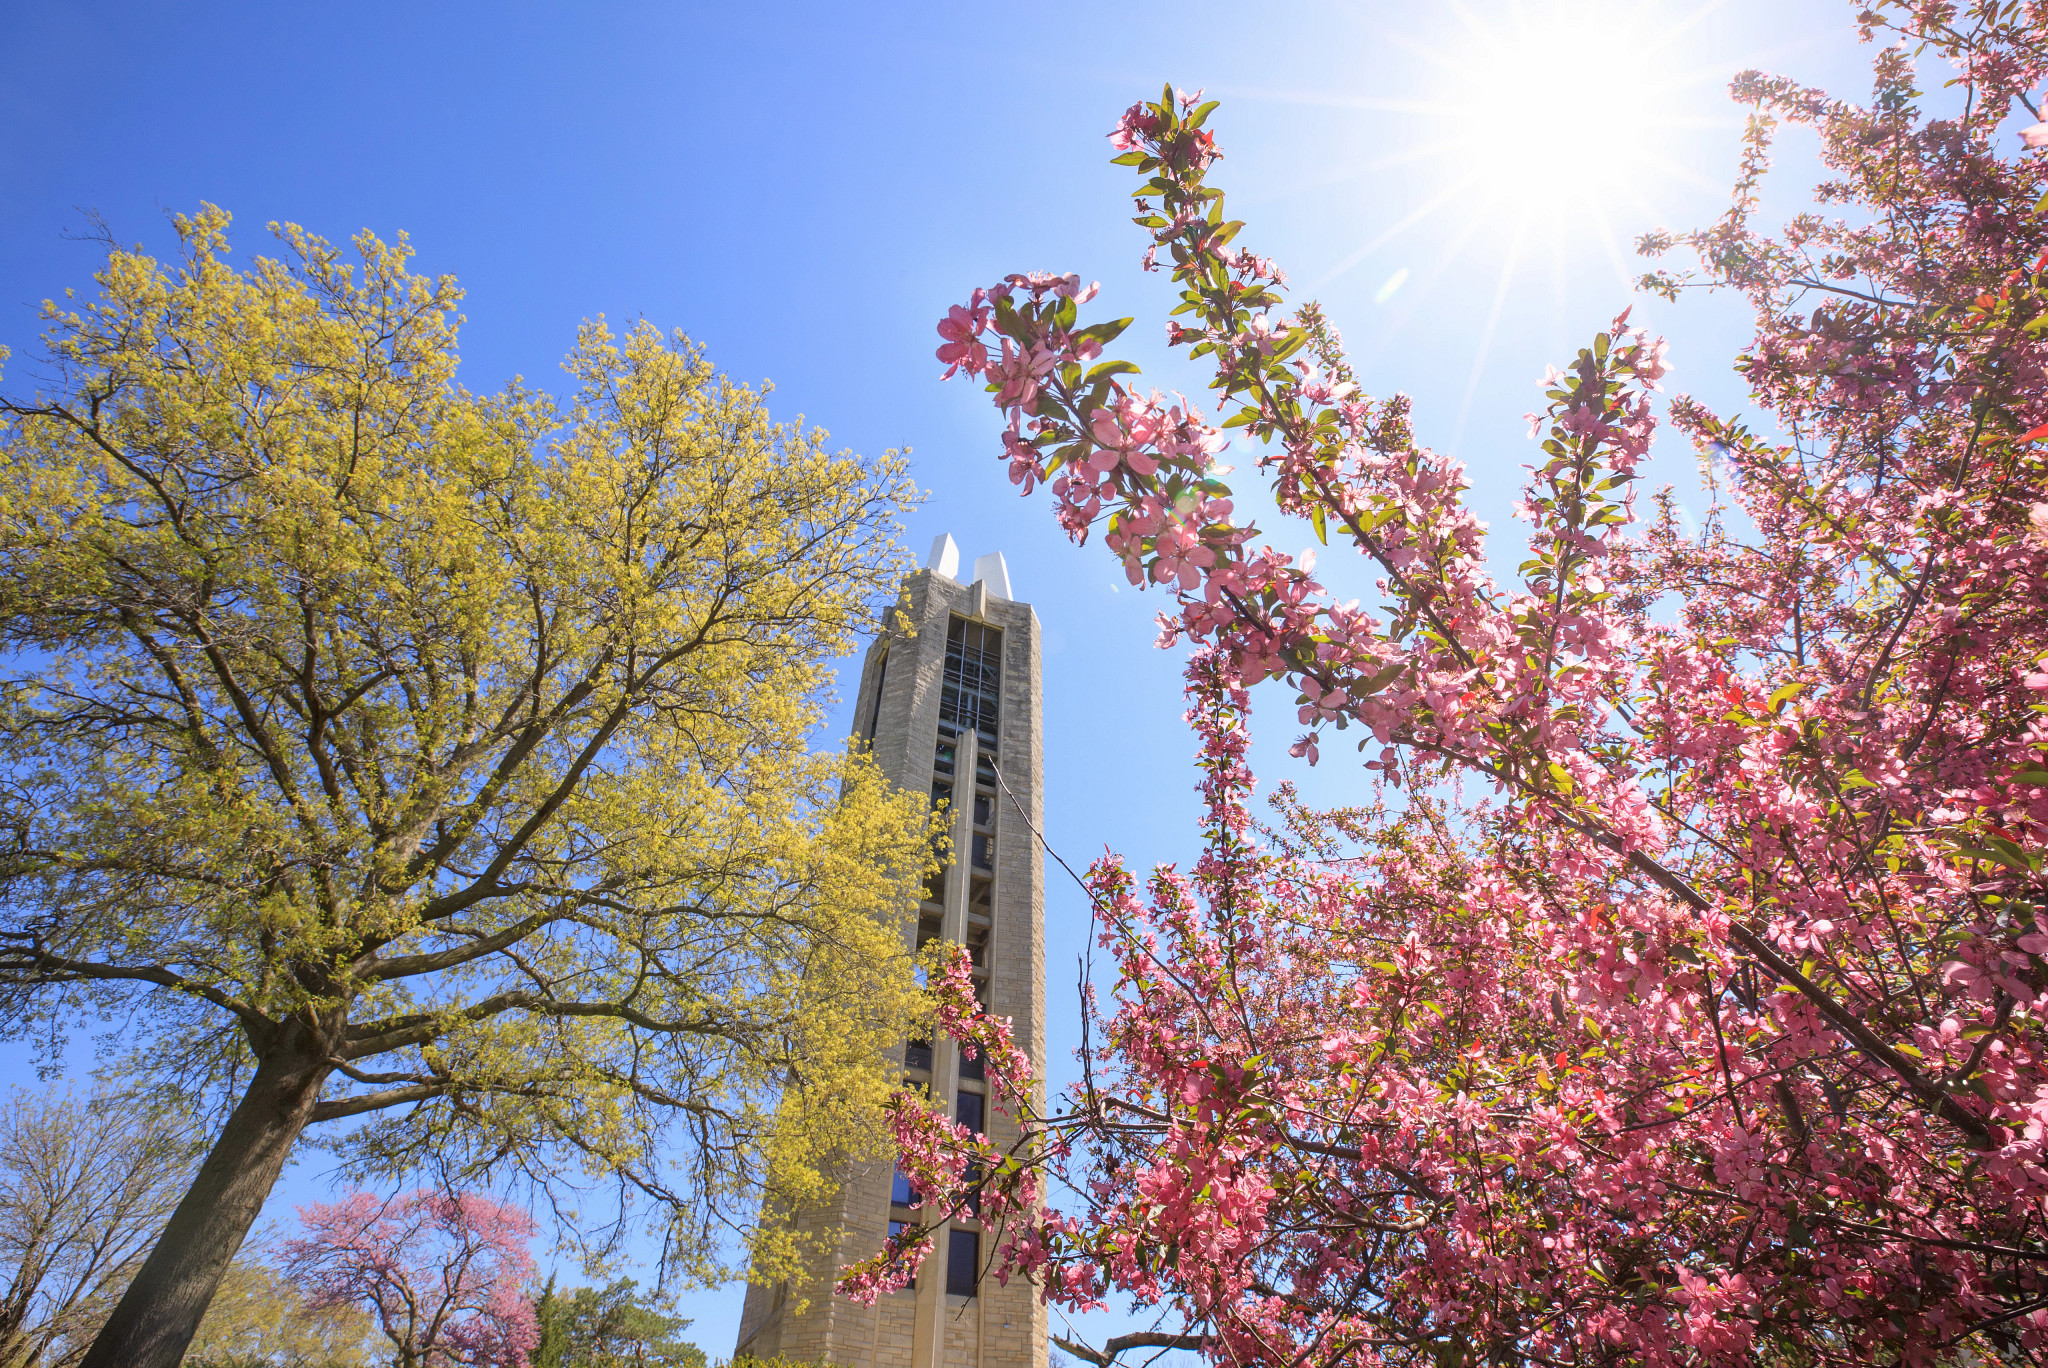 View from below the Campanile in the spring